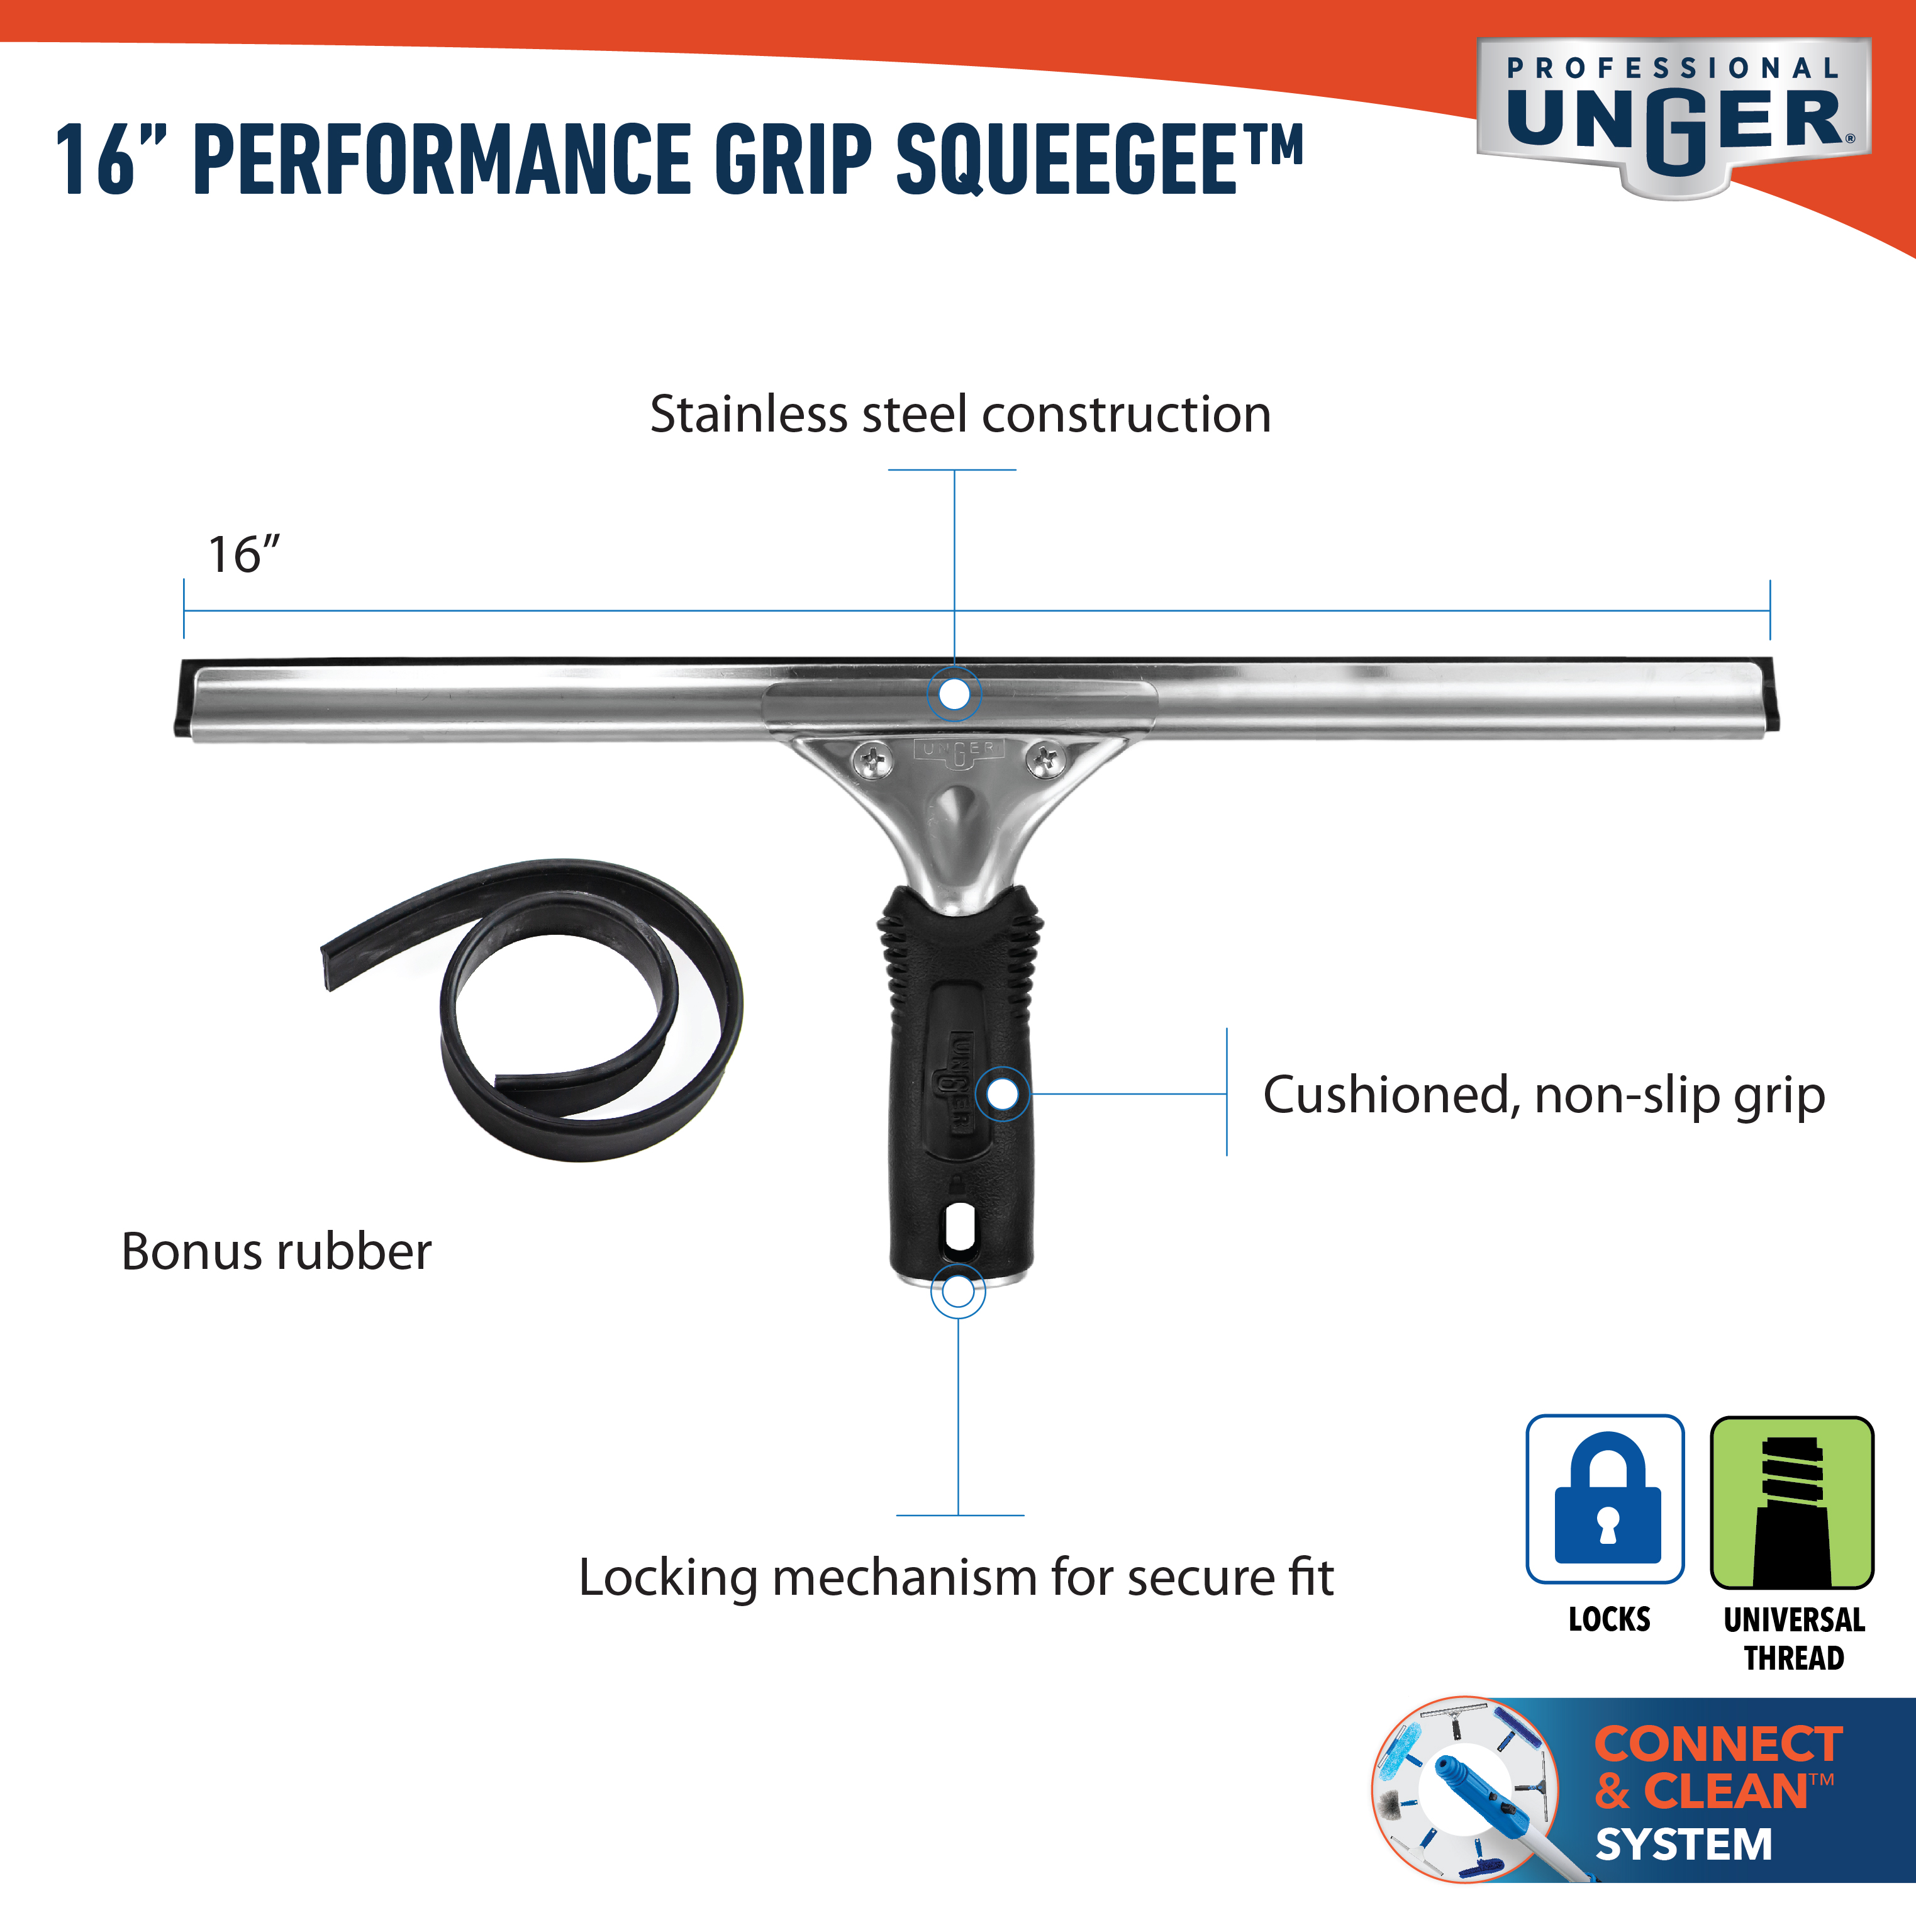 981020_UI_Unger Pro_16 inch Performance Grip Squeegee_Infographics 1